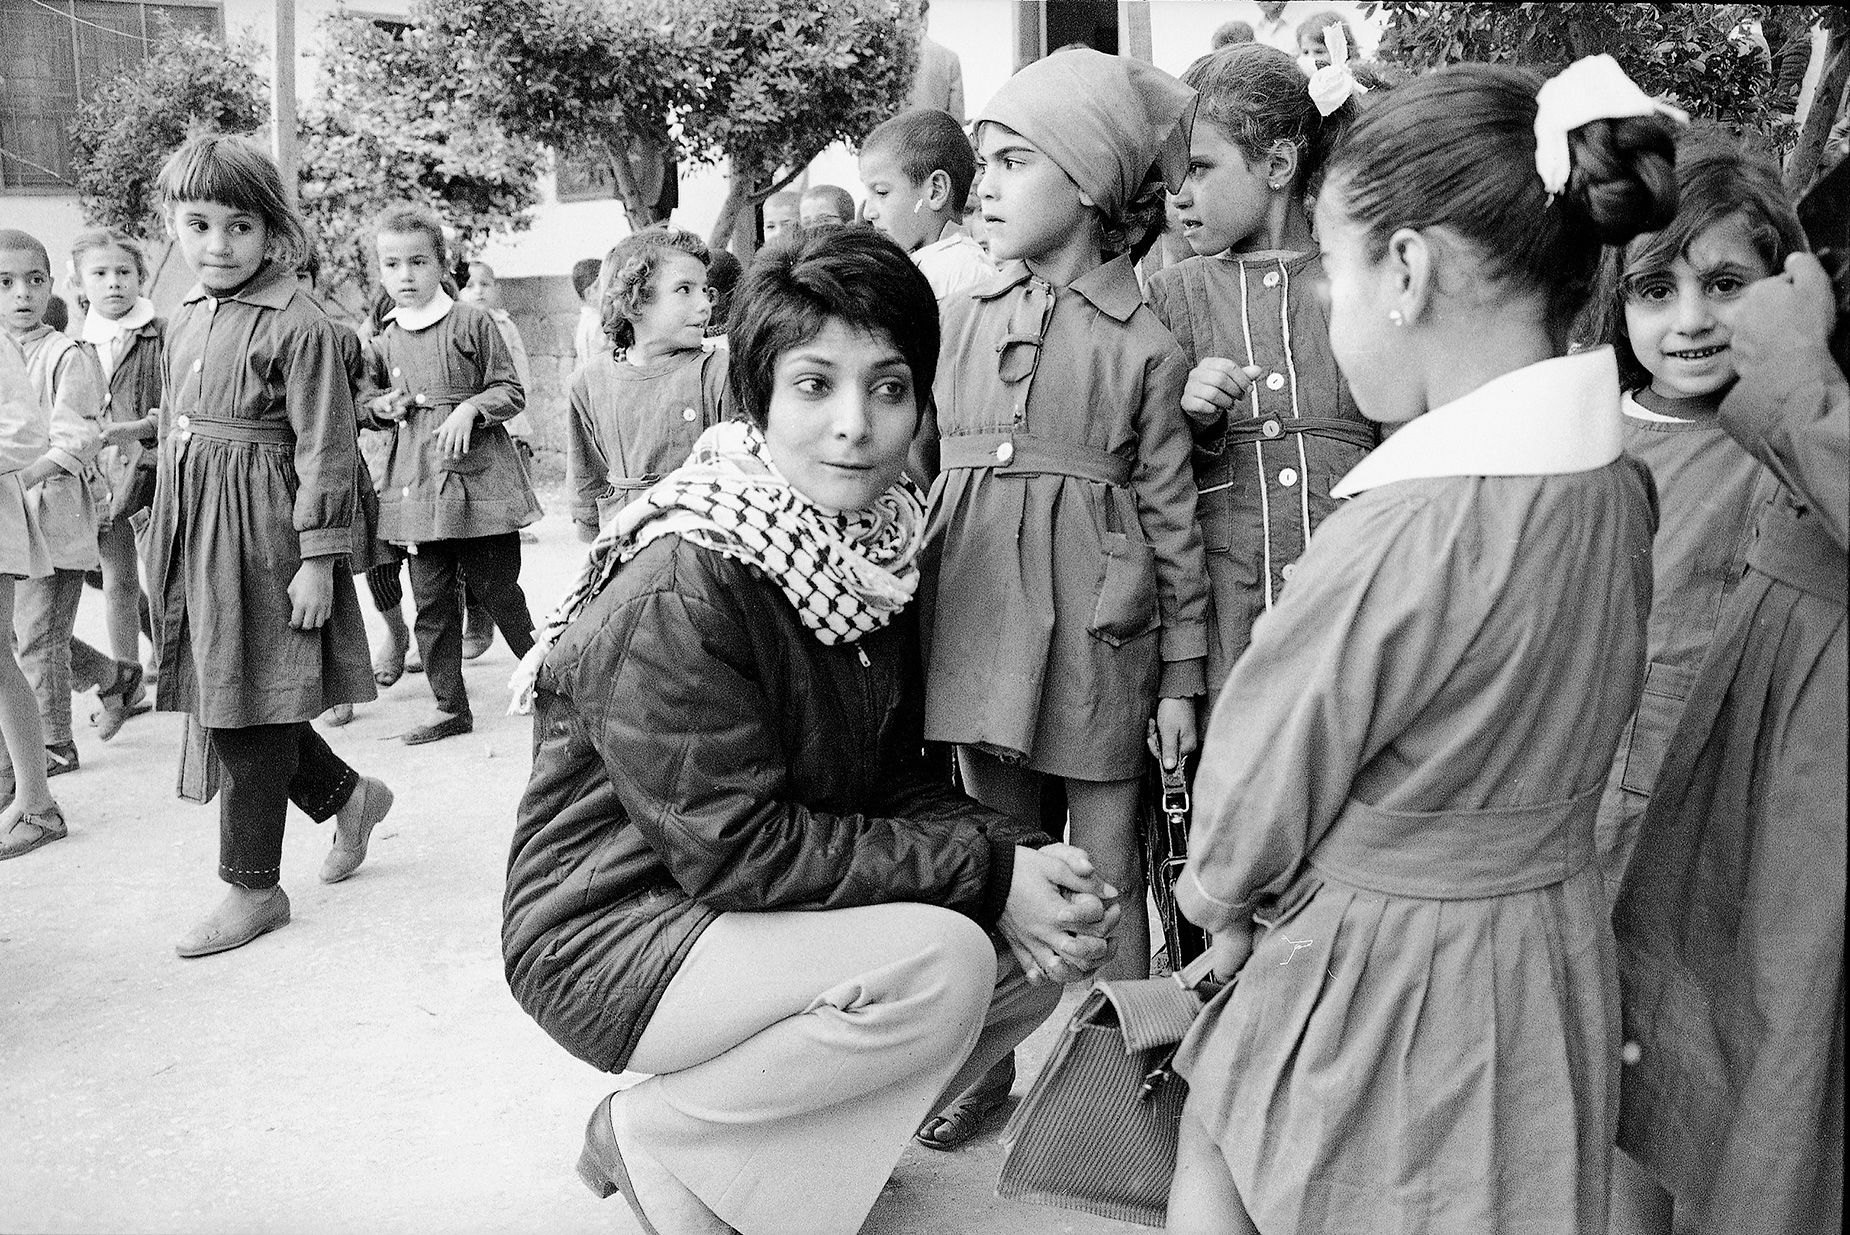 Leila Khaled wears a keffiyeh while visiting a Palestinian refugee camp in 1970.